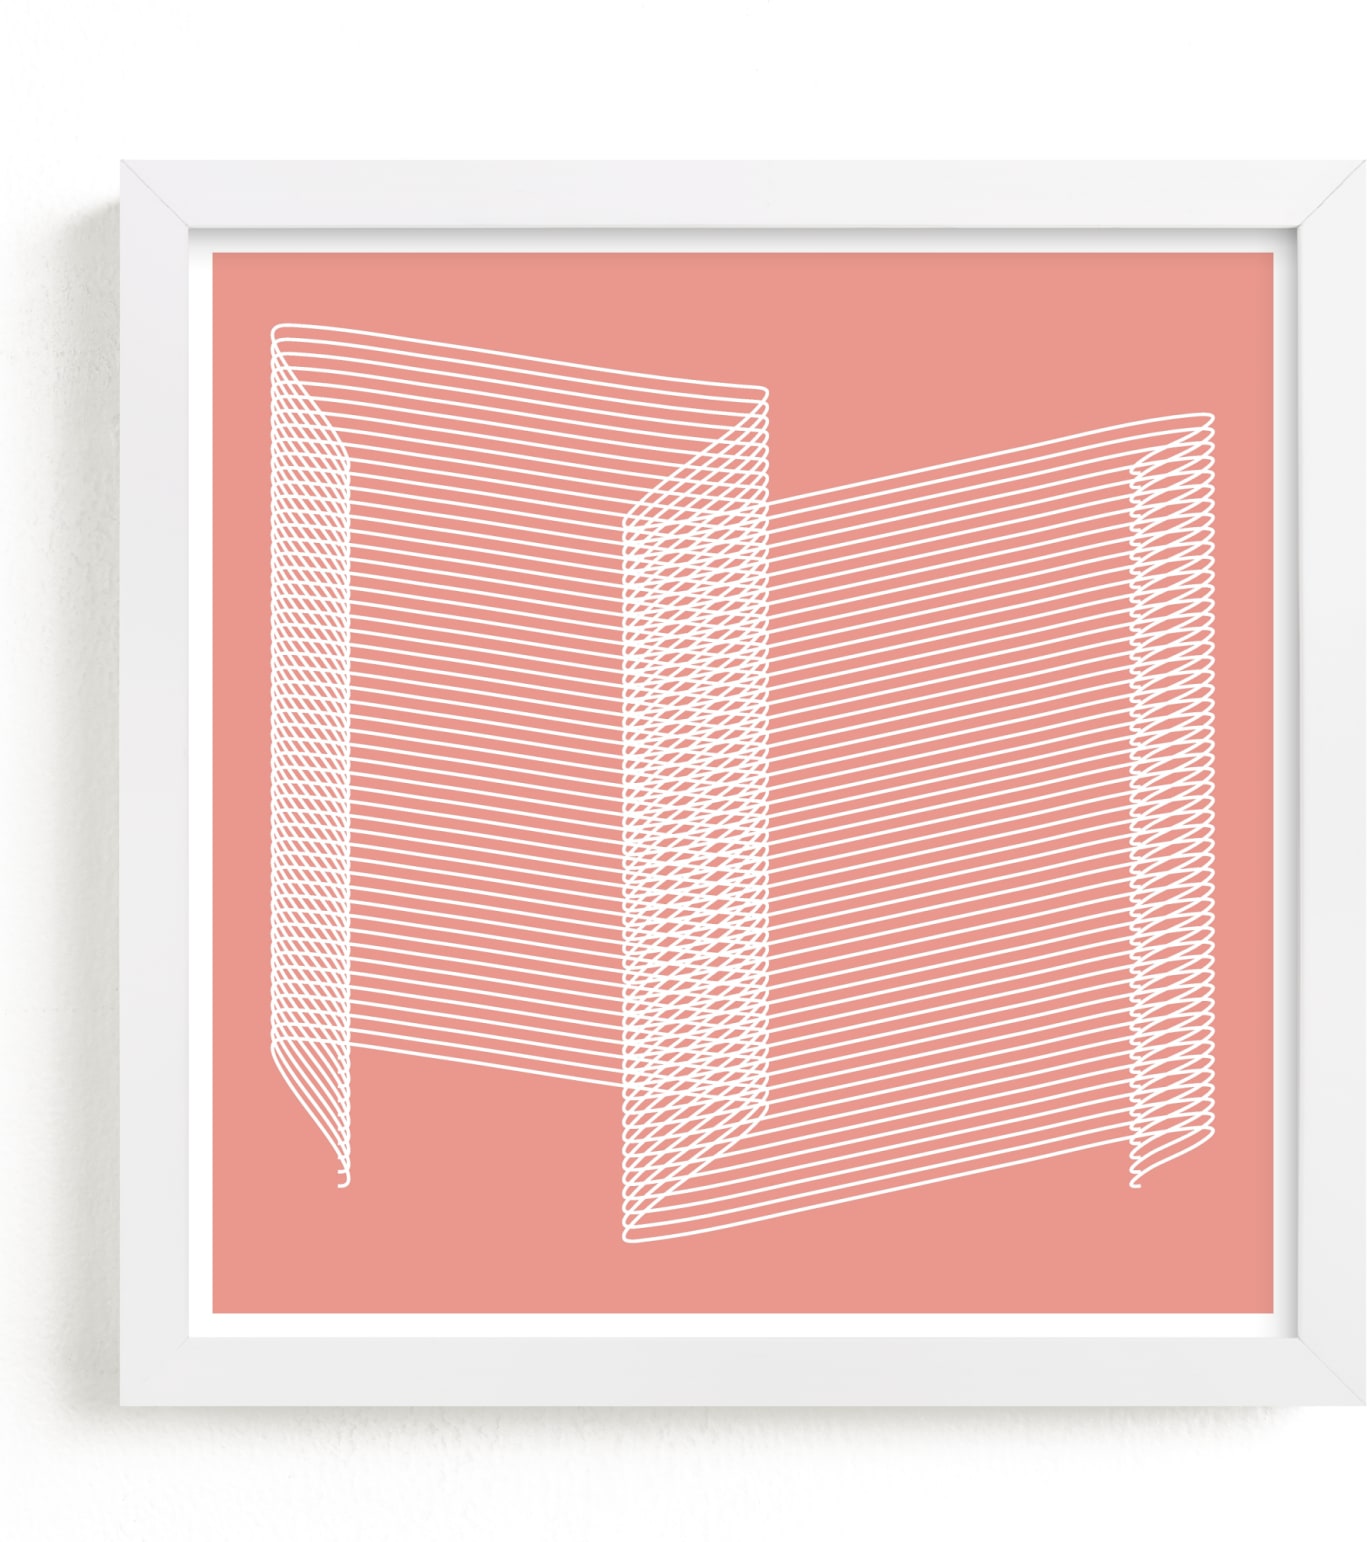 This is a white art by Marco Berrios called pink and lines.